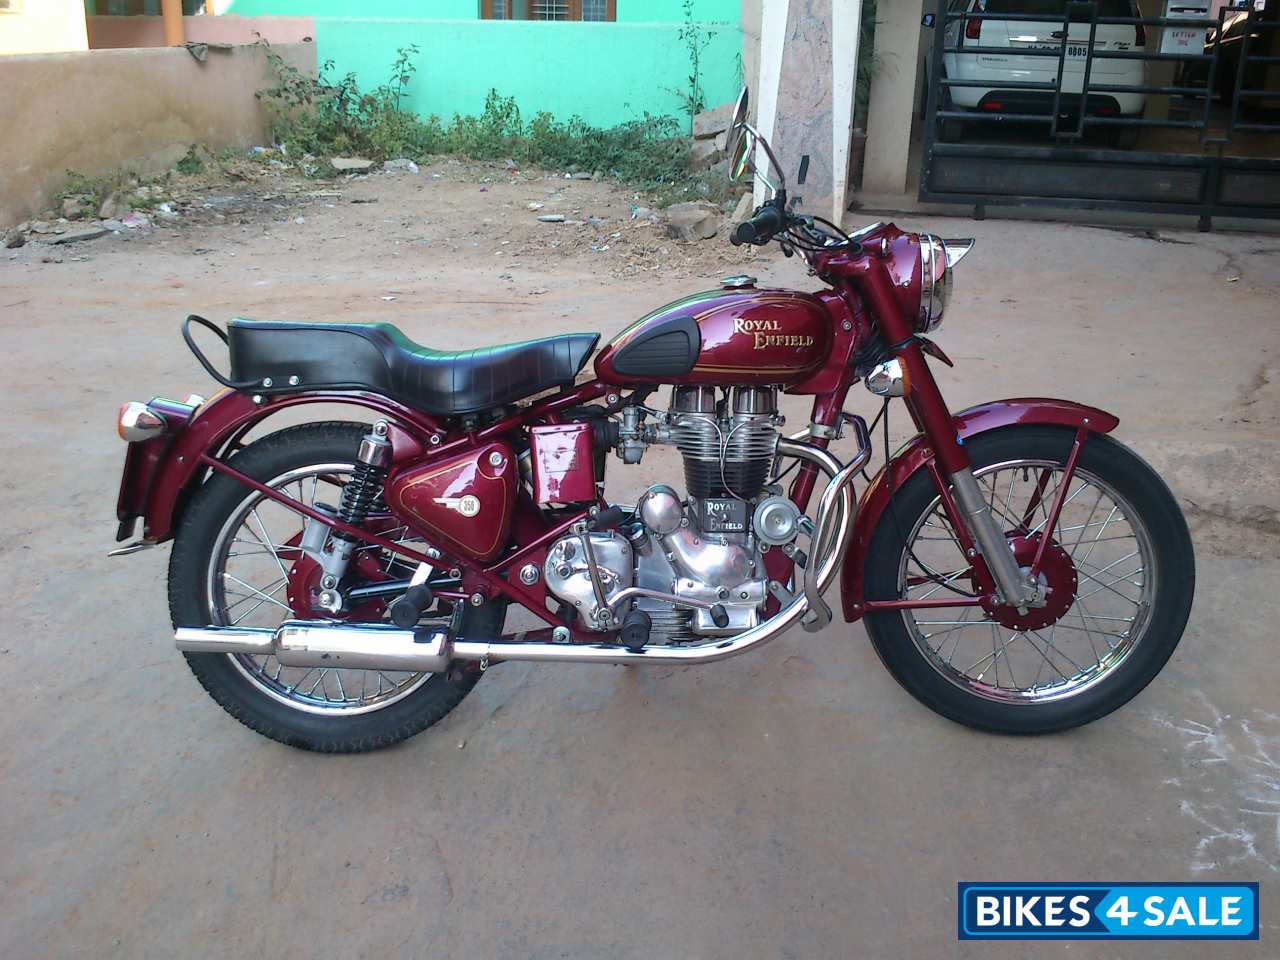 Used model Royal Enfield Bullet Standard for sale in ID 72107. Cherry Red colour - Bikes4Sale